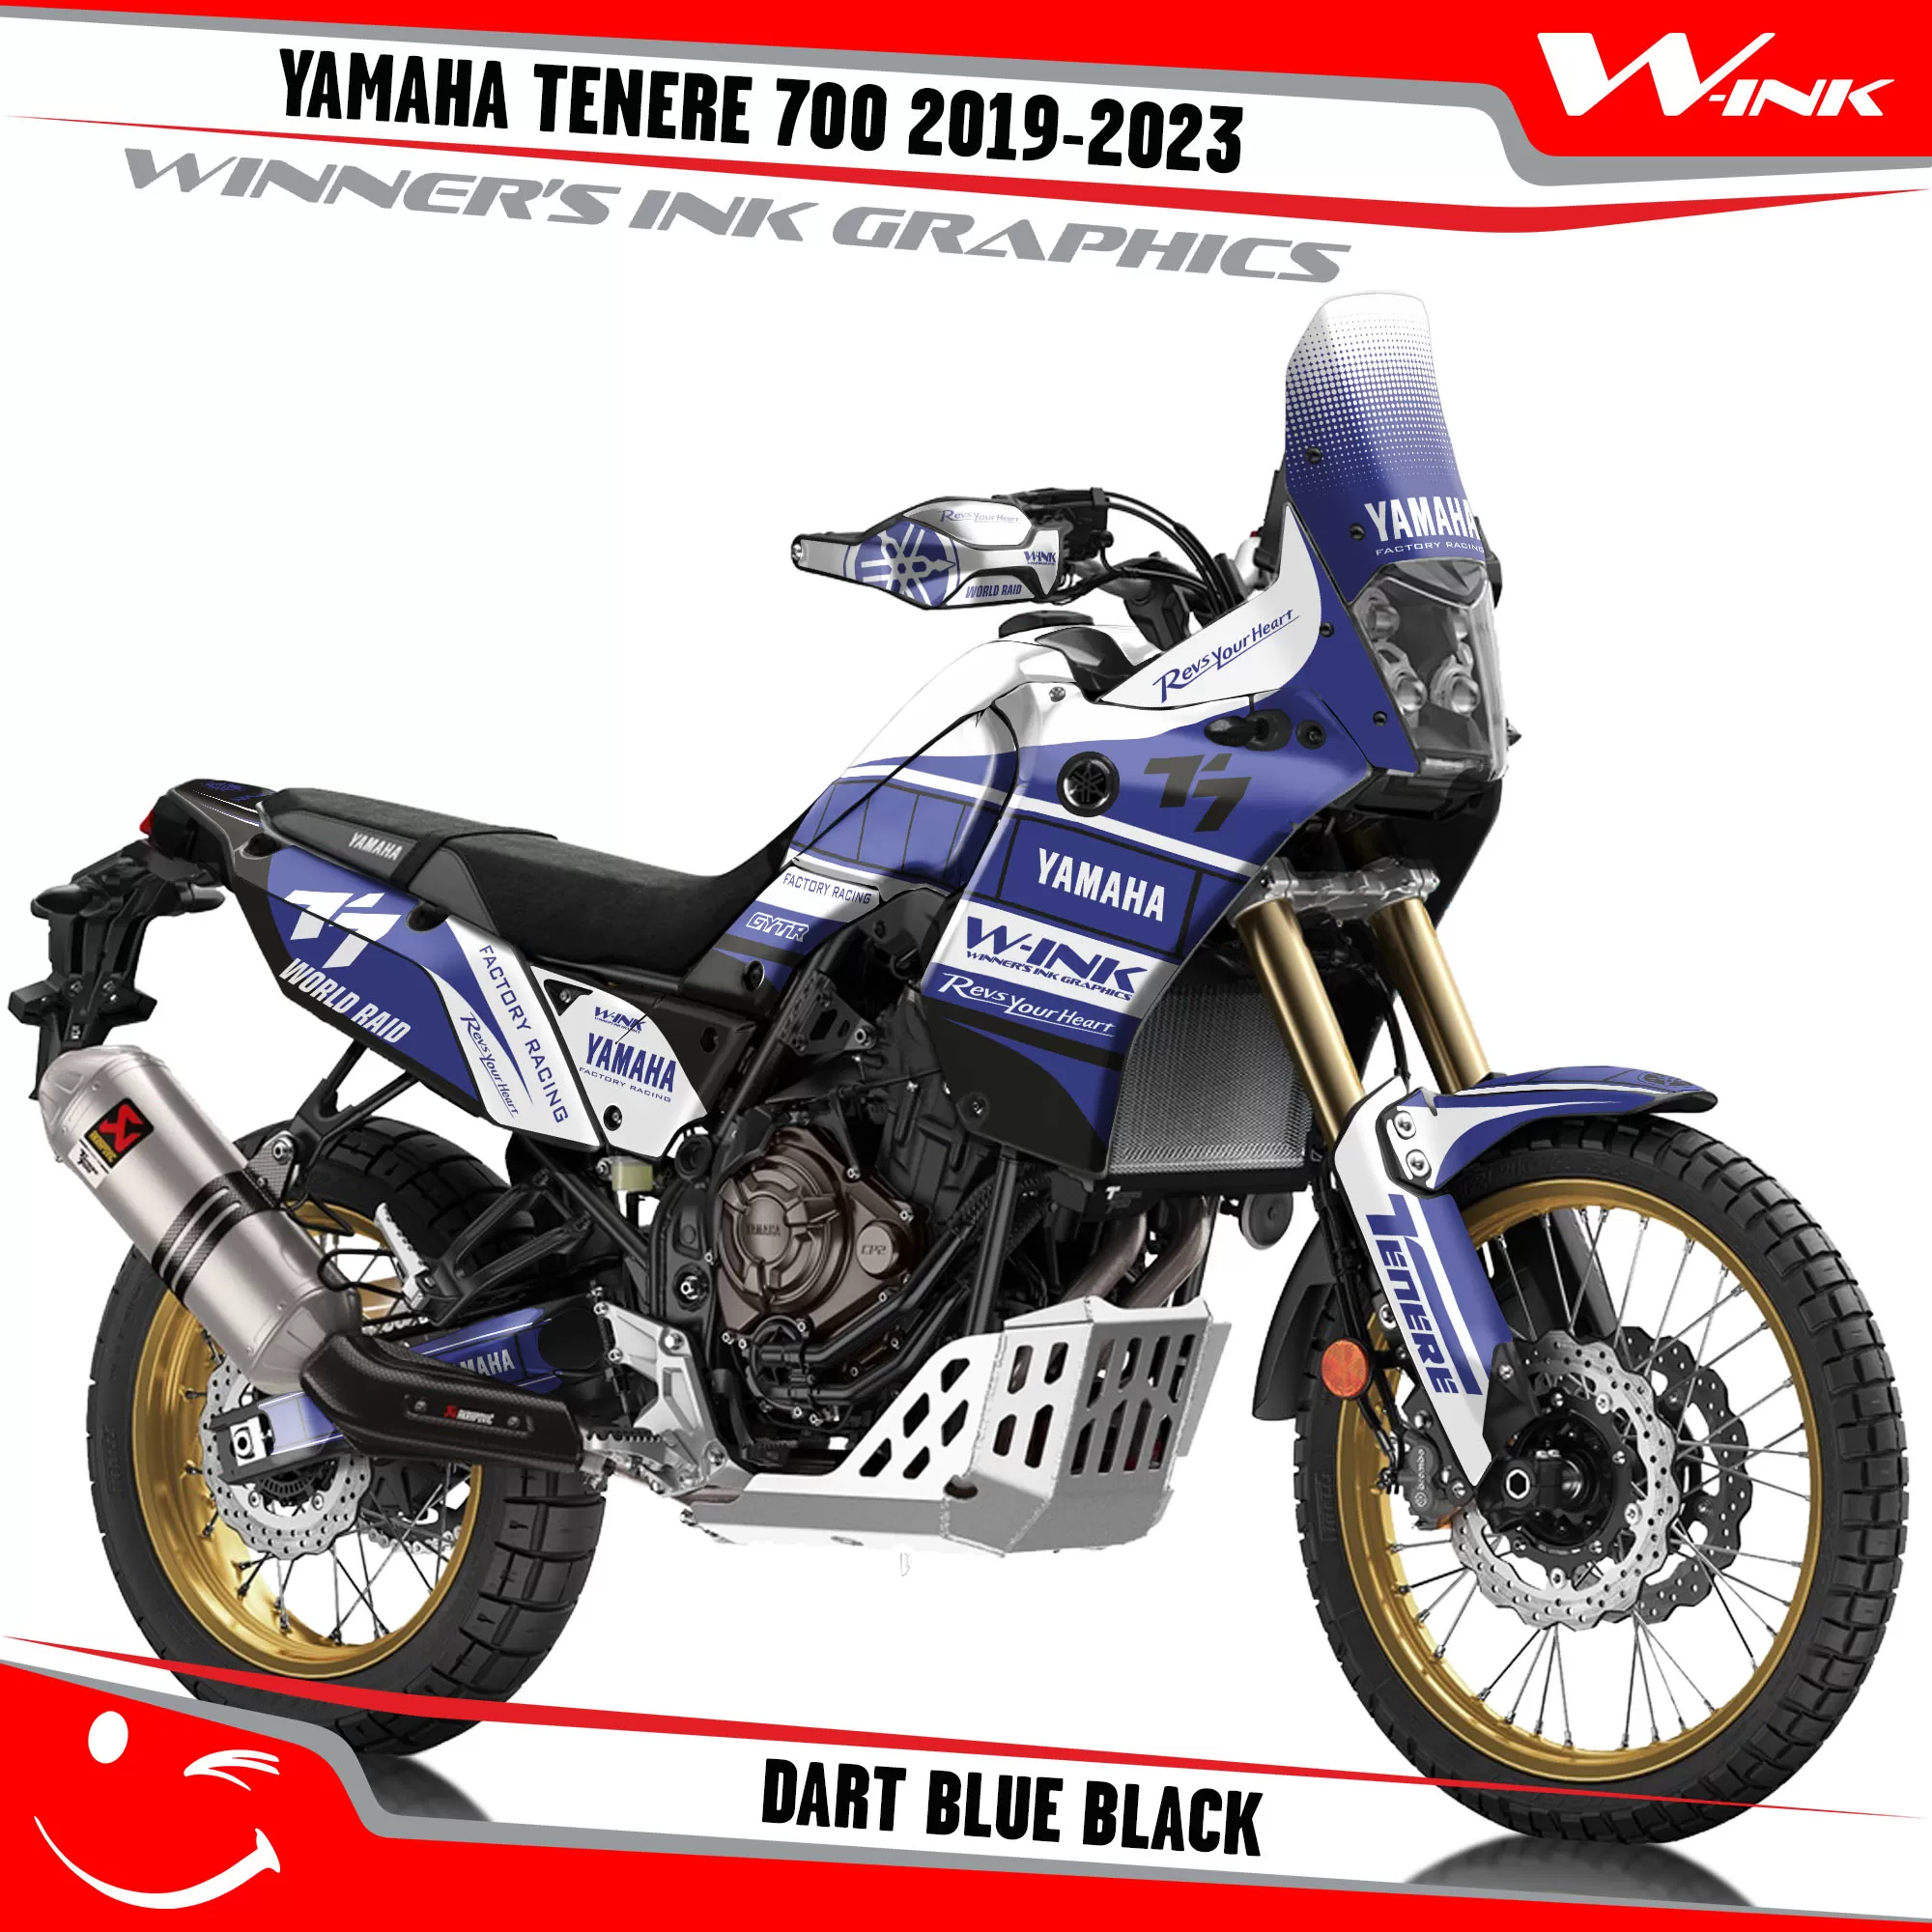 Yamaha-Tenere-700-2019-2020-2021-2022-2023-graphics-kit-and-decals-with-desing-Dart-Blue-Black